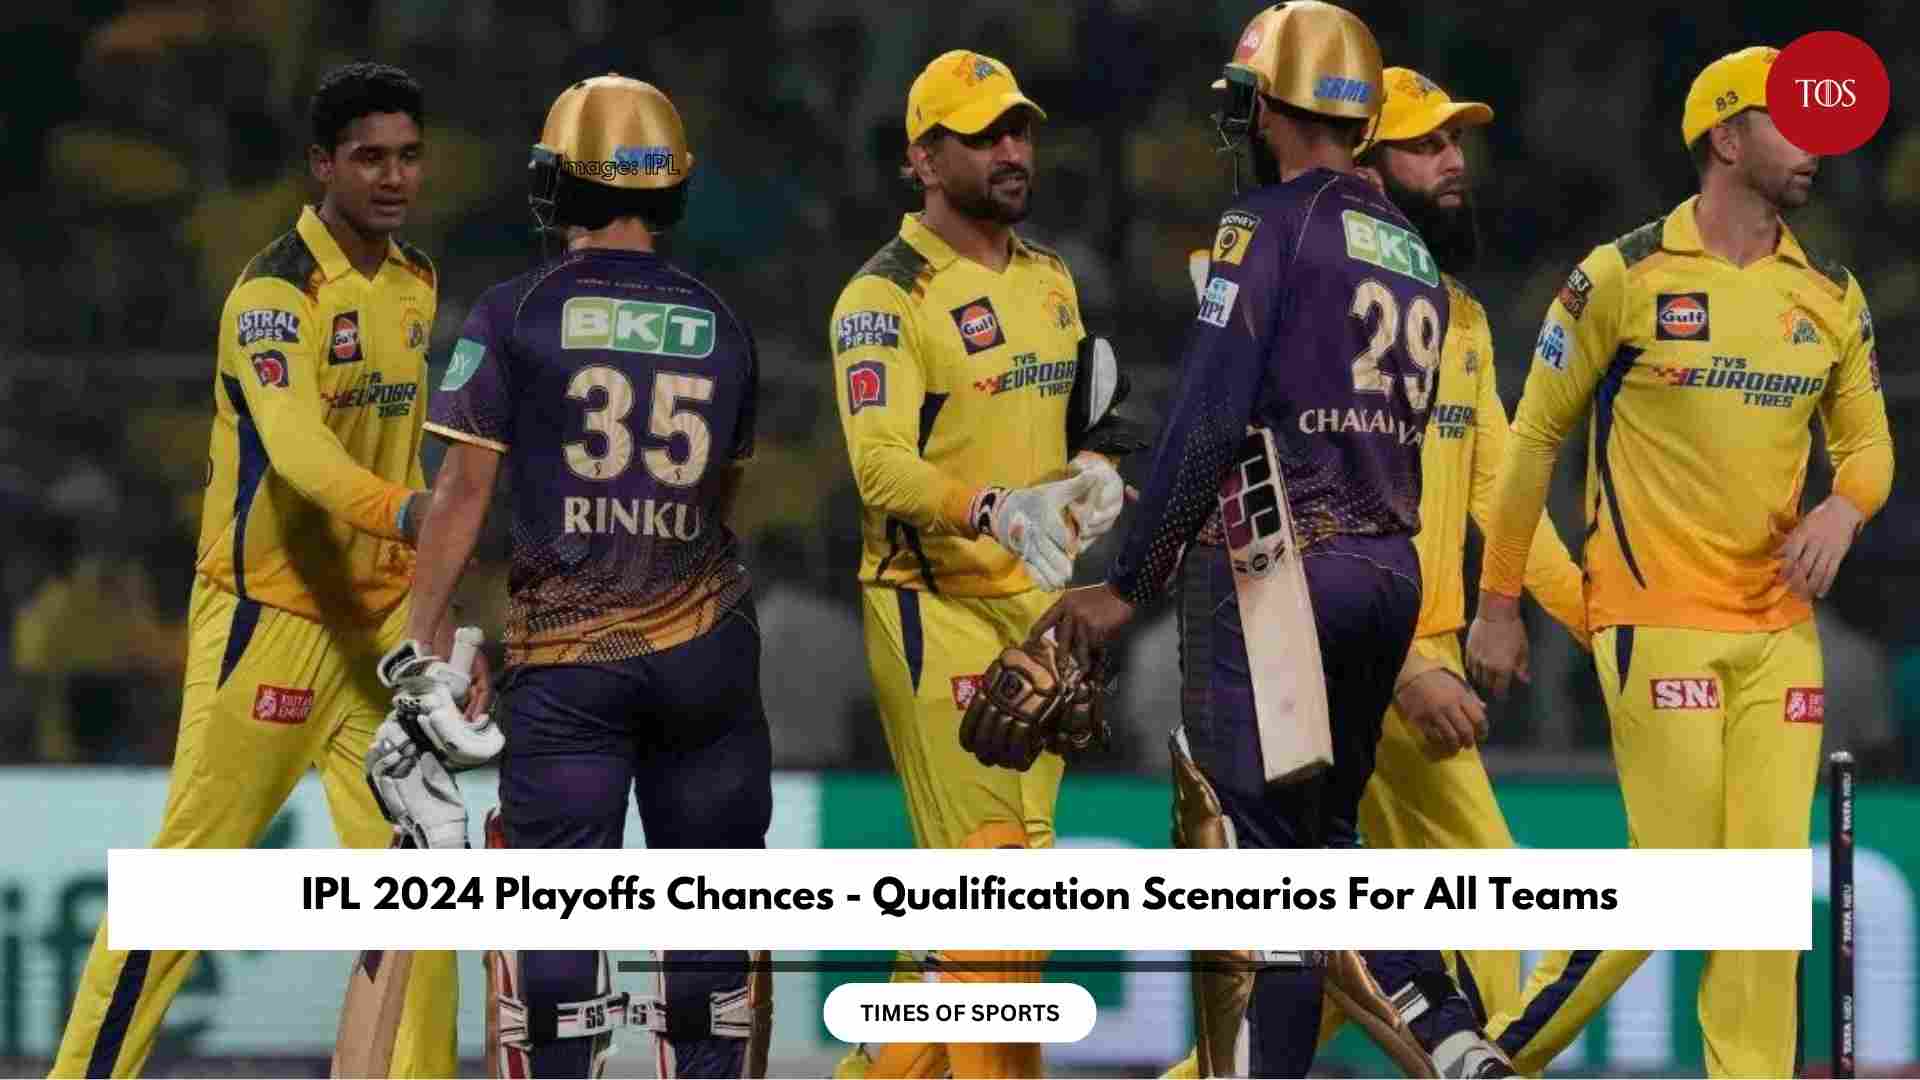 IPL 2024 Playoffs Chances Qualification Scenarios For All Teams